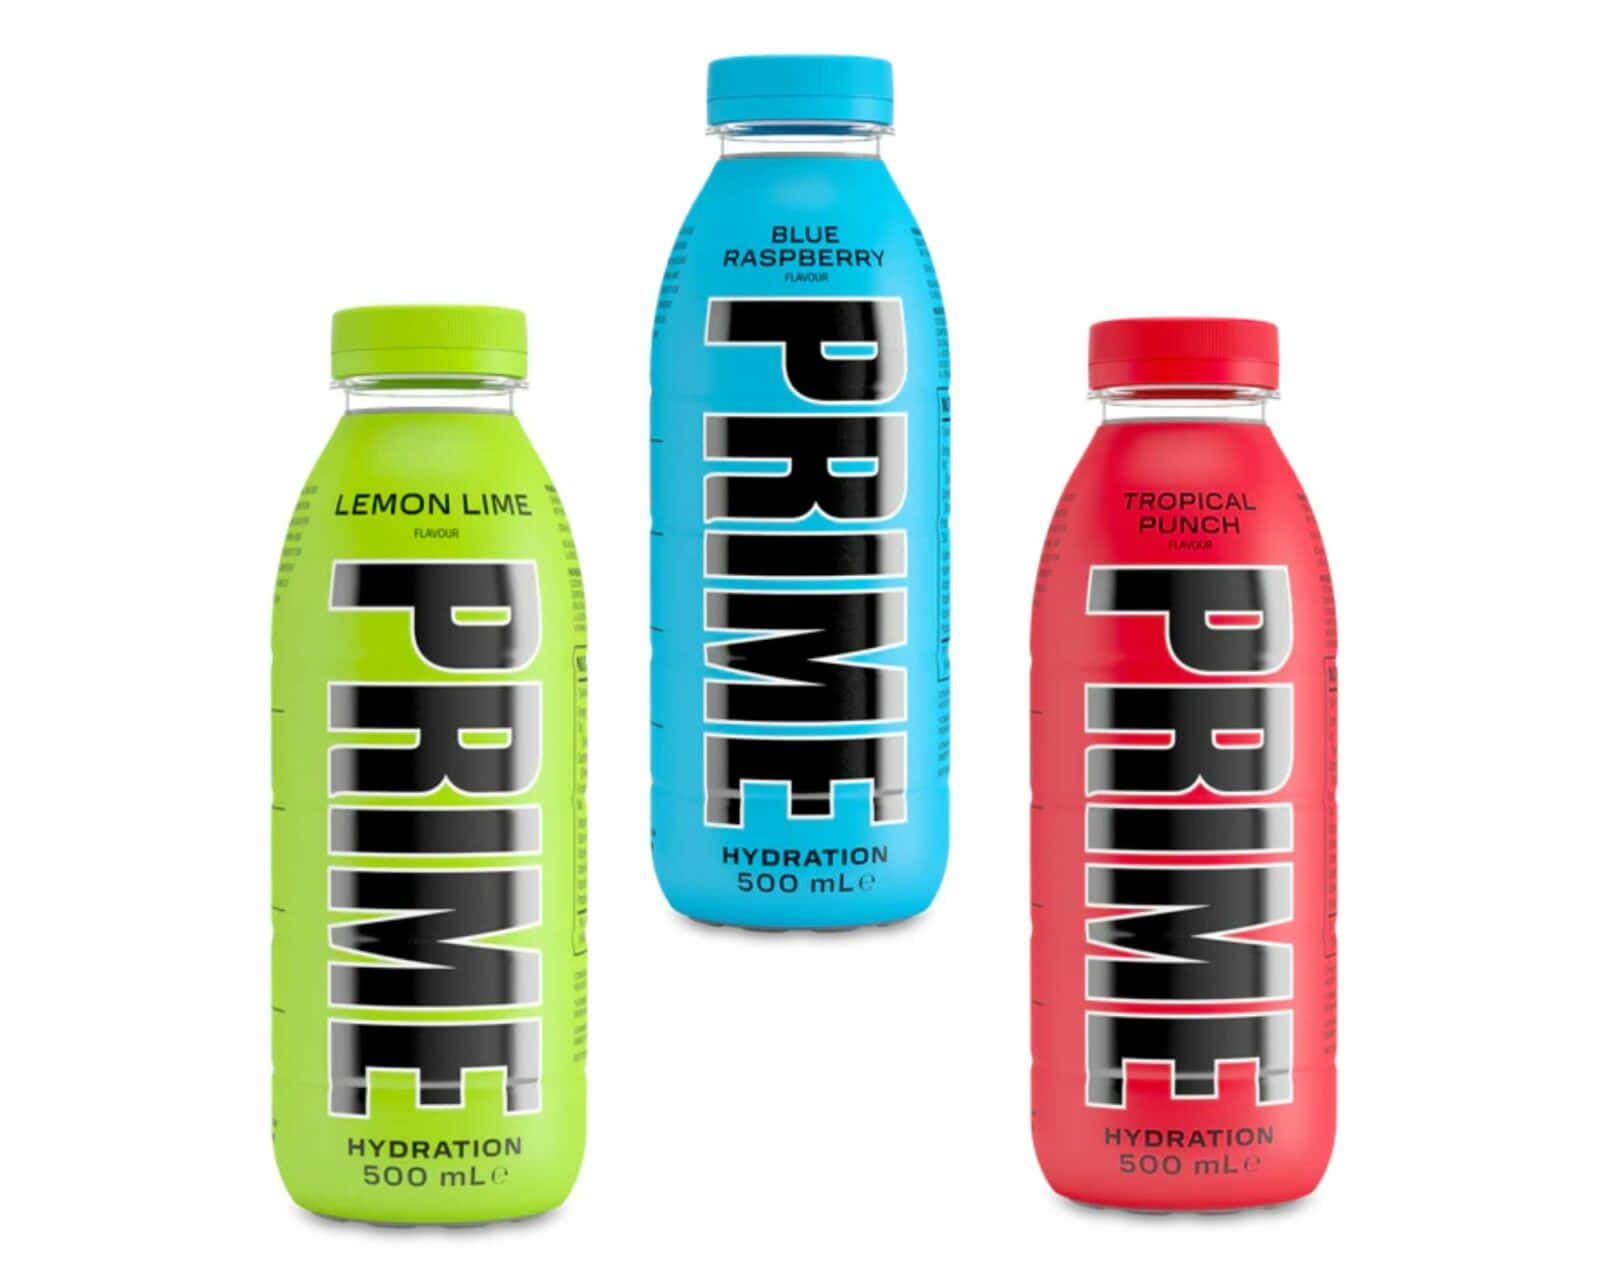 Prime Hydration Drink Flavors Wallpaper